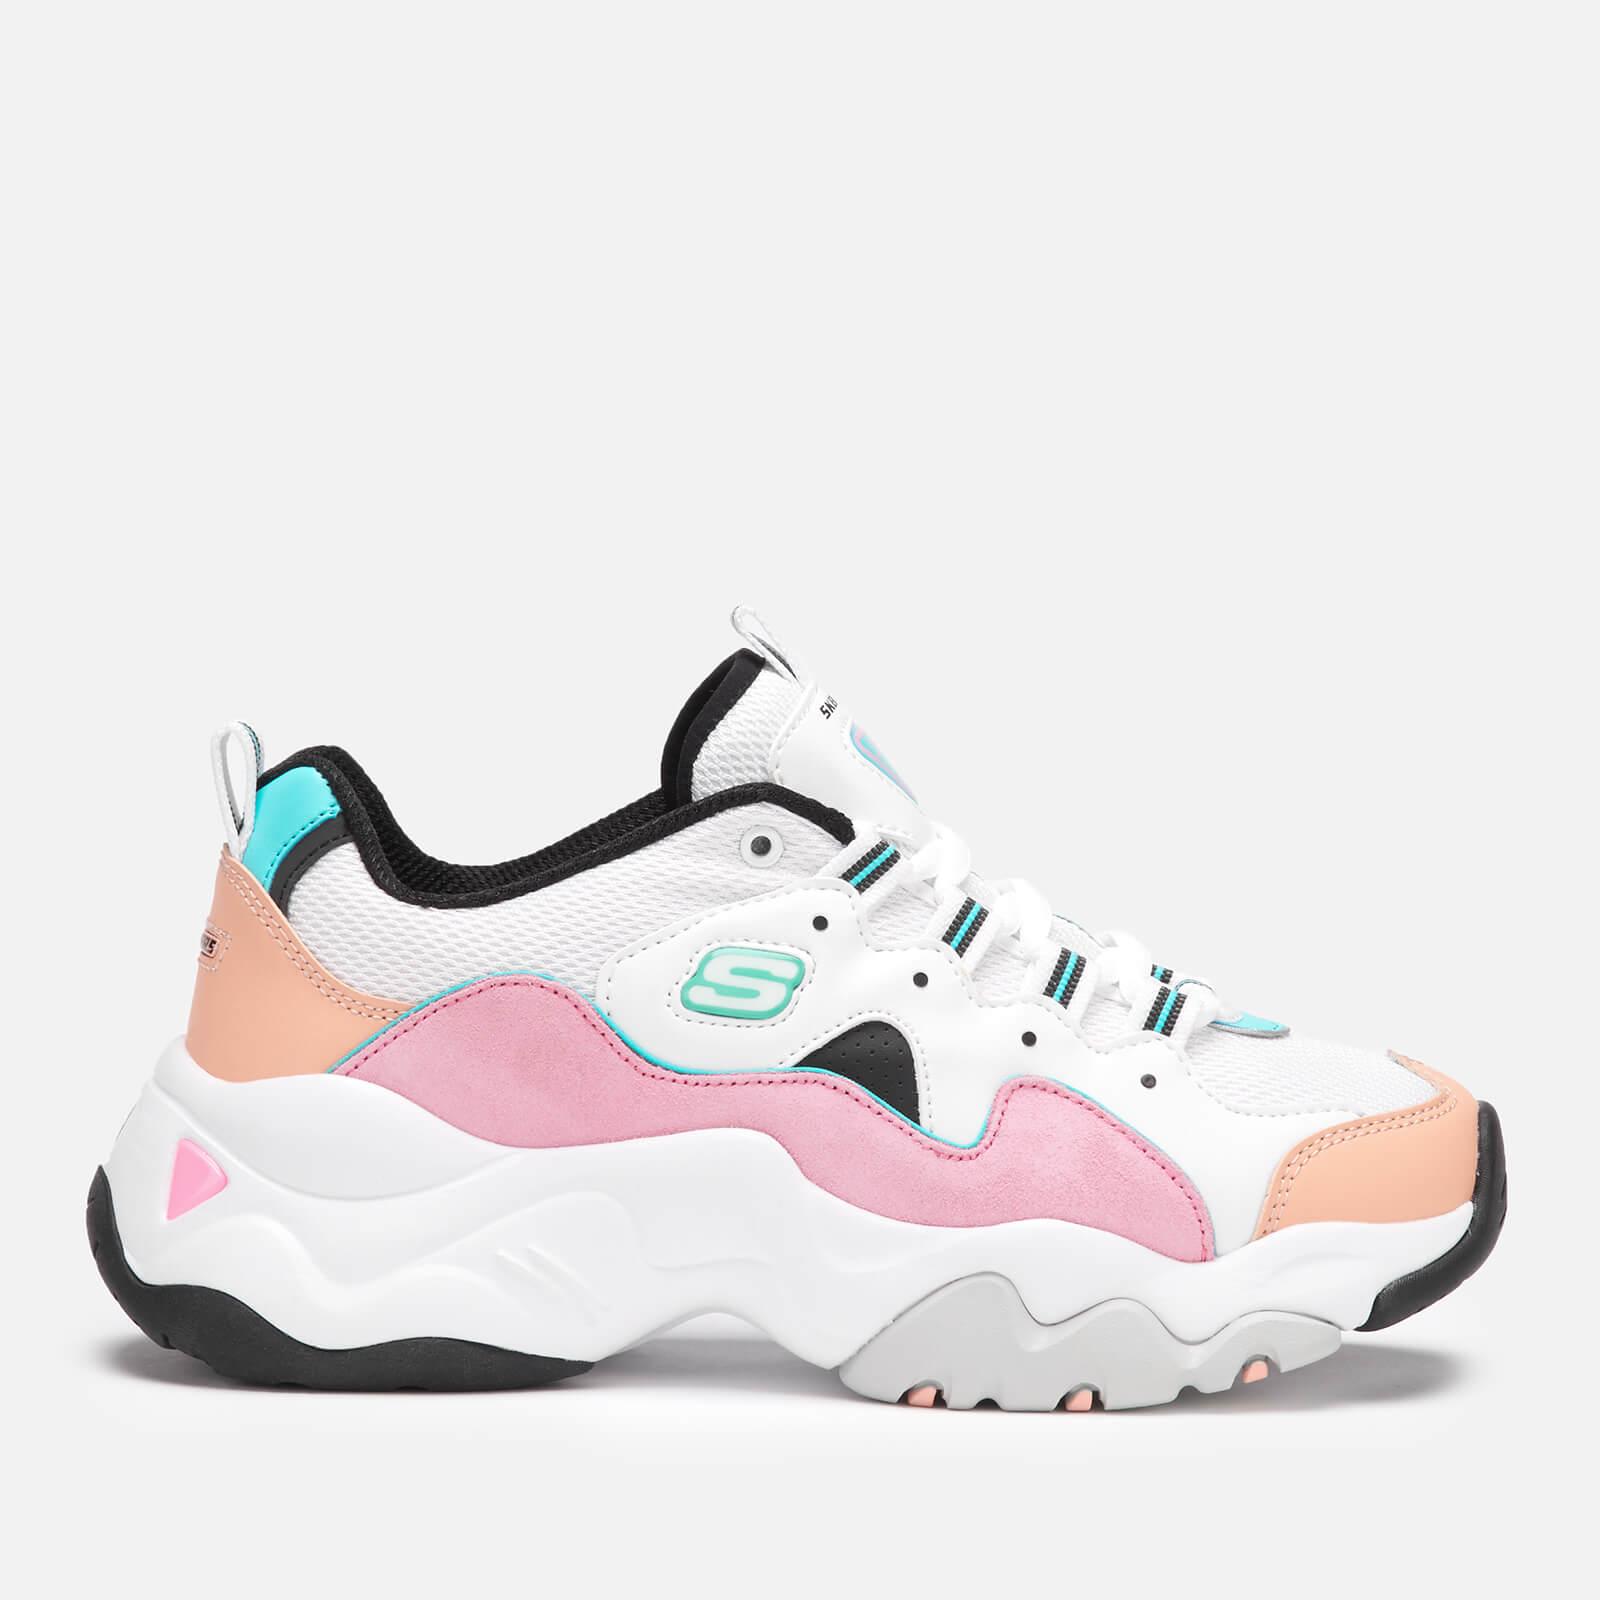 Skechers Rubber D'lite Chunky Trainers 3.0 In Pastel | Lyst